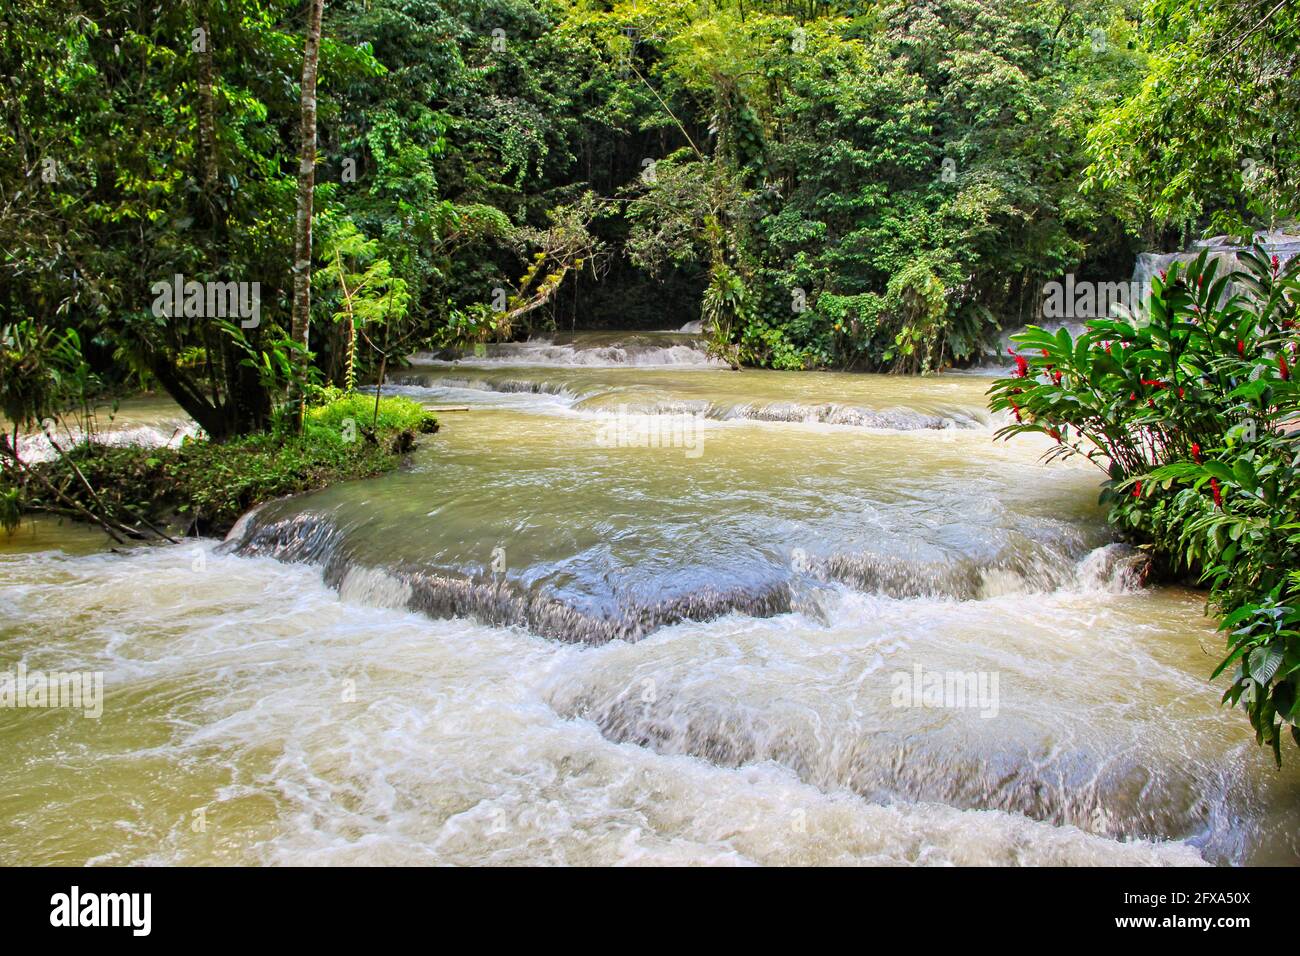 The Dunns's River Falls in Jamaica in the Dunn's River Falls Park Stock Photo